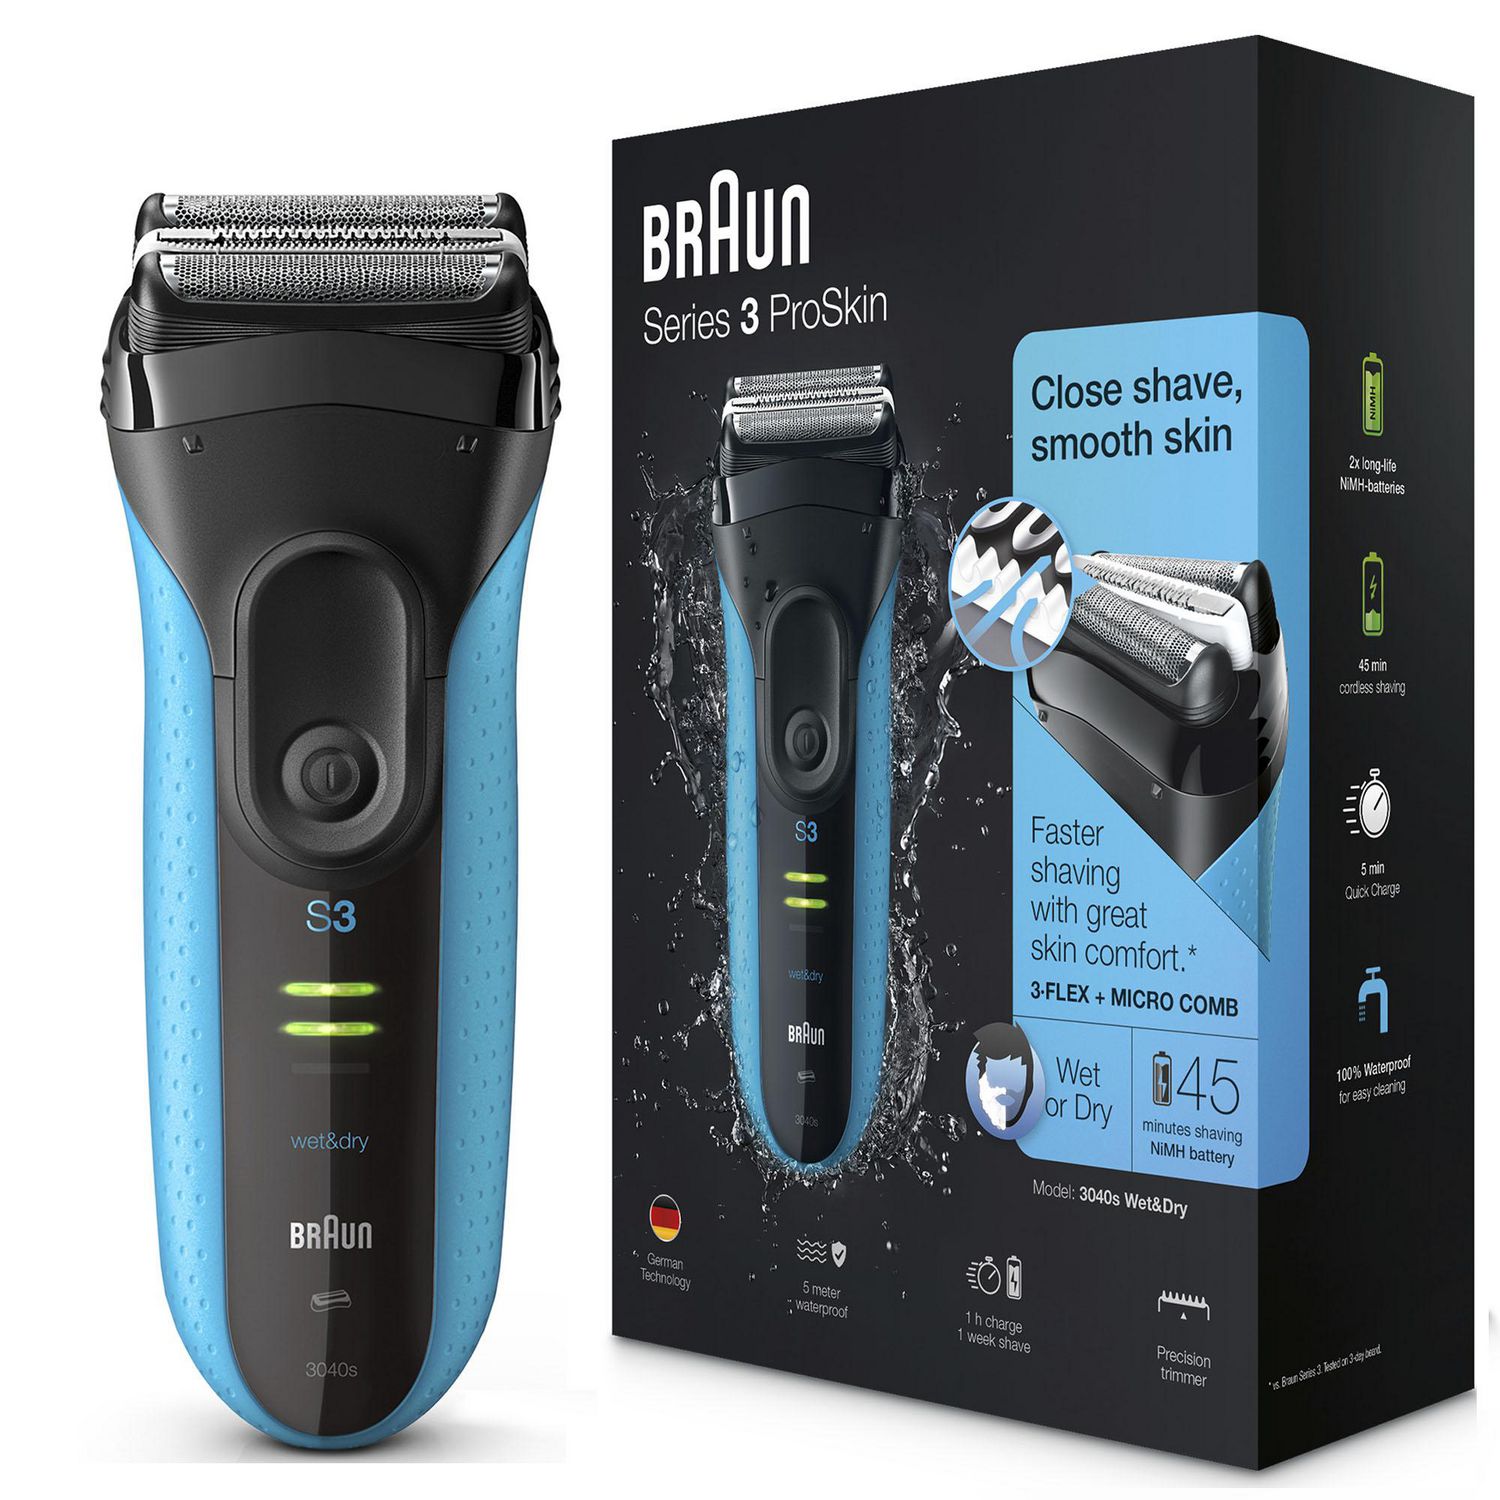 Razor Set Shaver, 3-in-1 Dry for Series 1 and Proskin Black/Blue, Electric Men, Braun Wet 3 Shave&Style